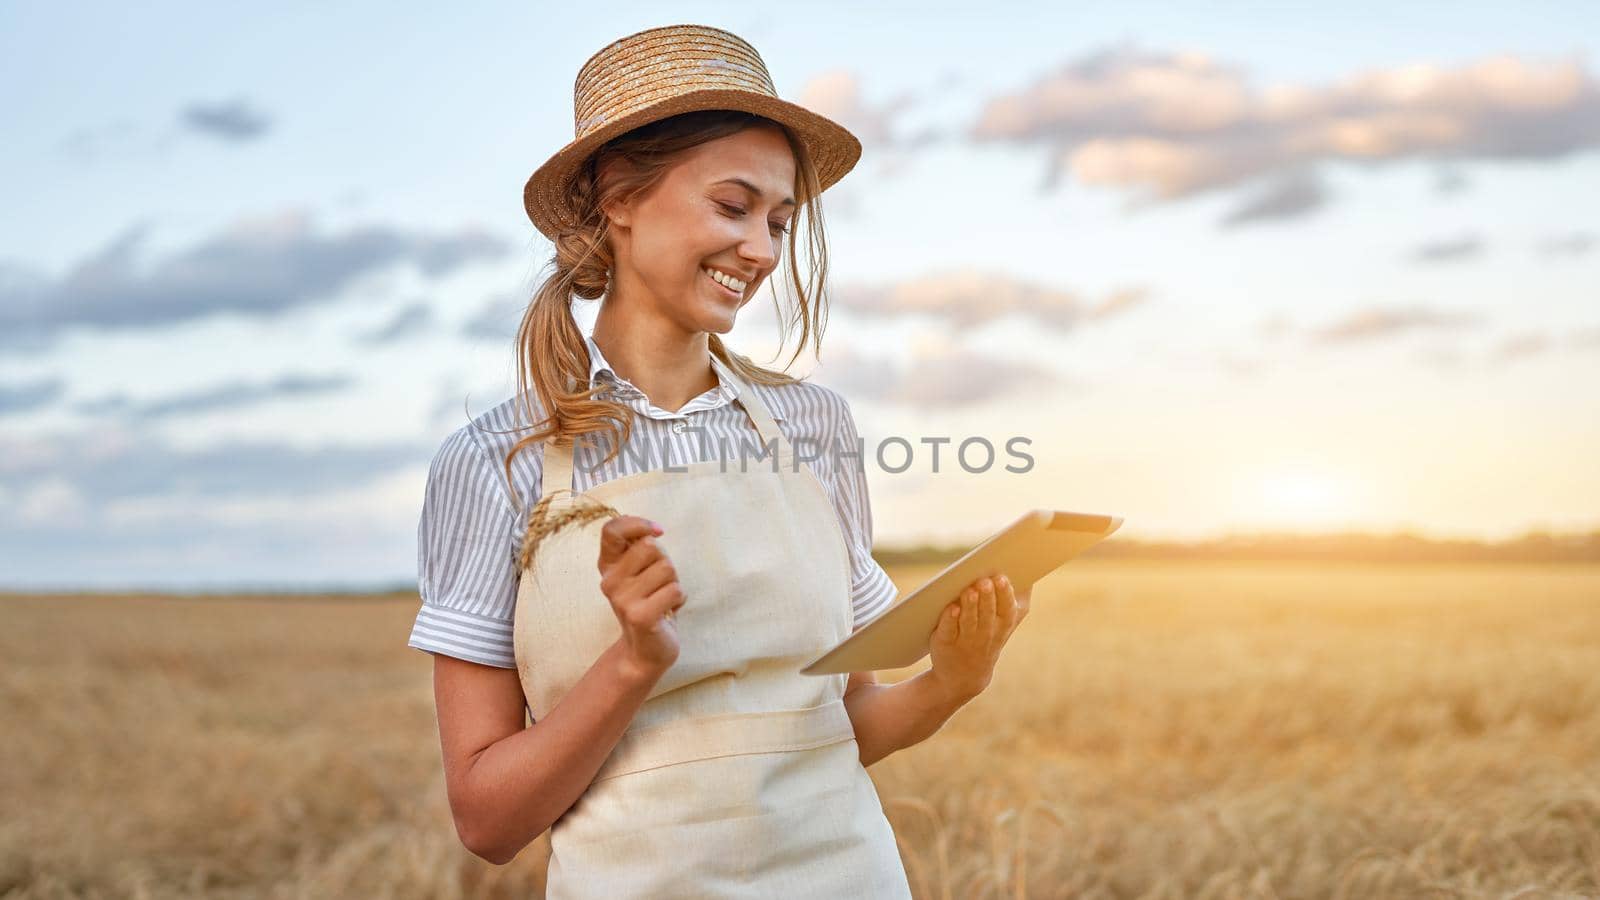 Female agronomist specialist research monitoring analysis data agribusiness Woman farmer straw hat smart farming standing farmland smiling using digital tablet Caucasian worker agricultural field